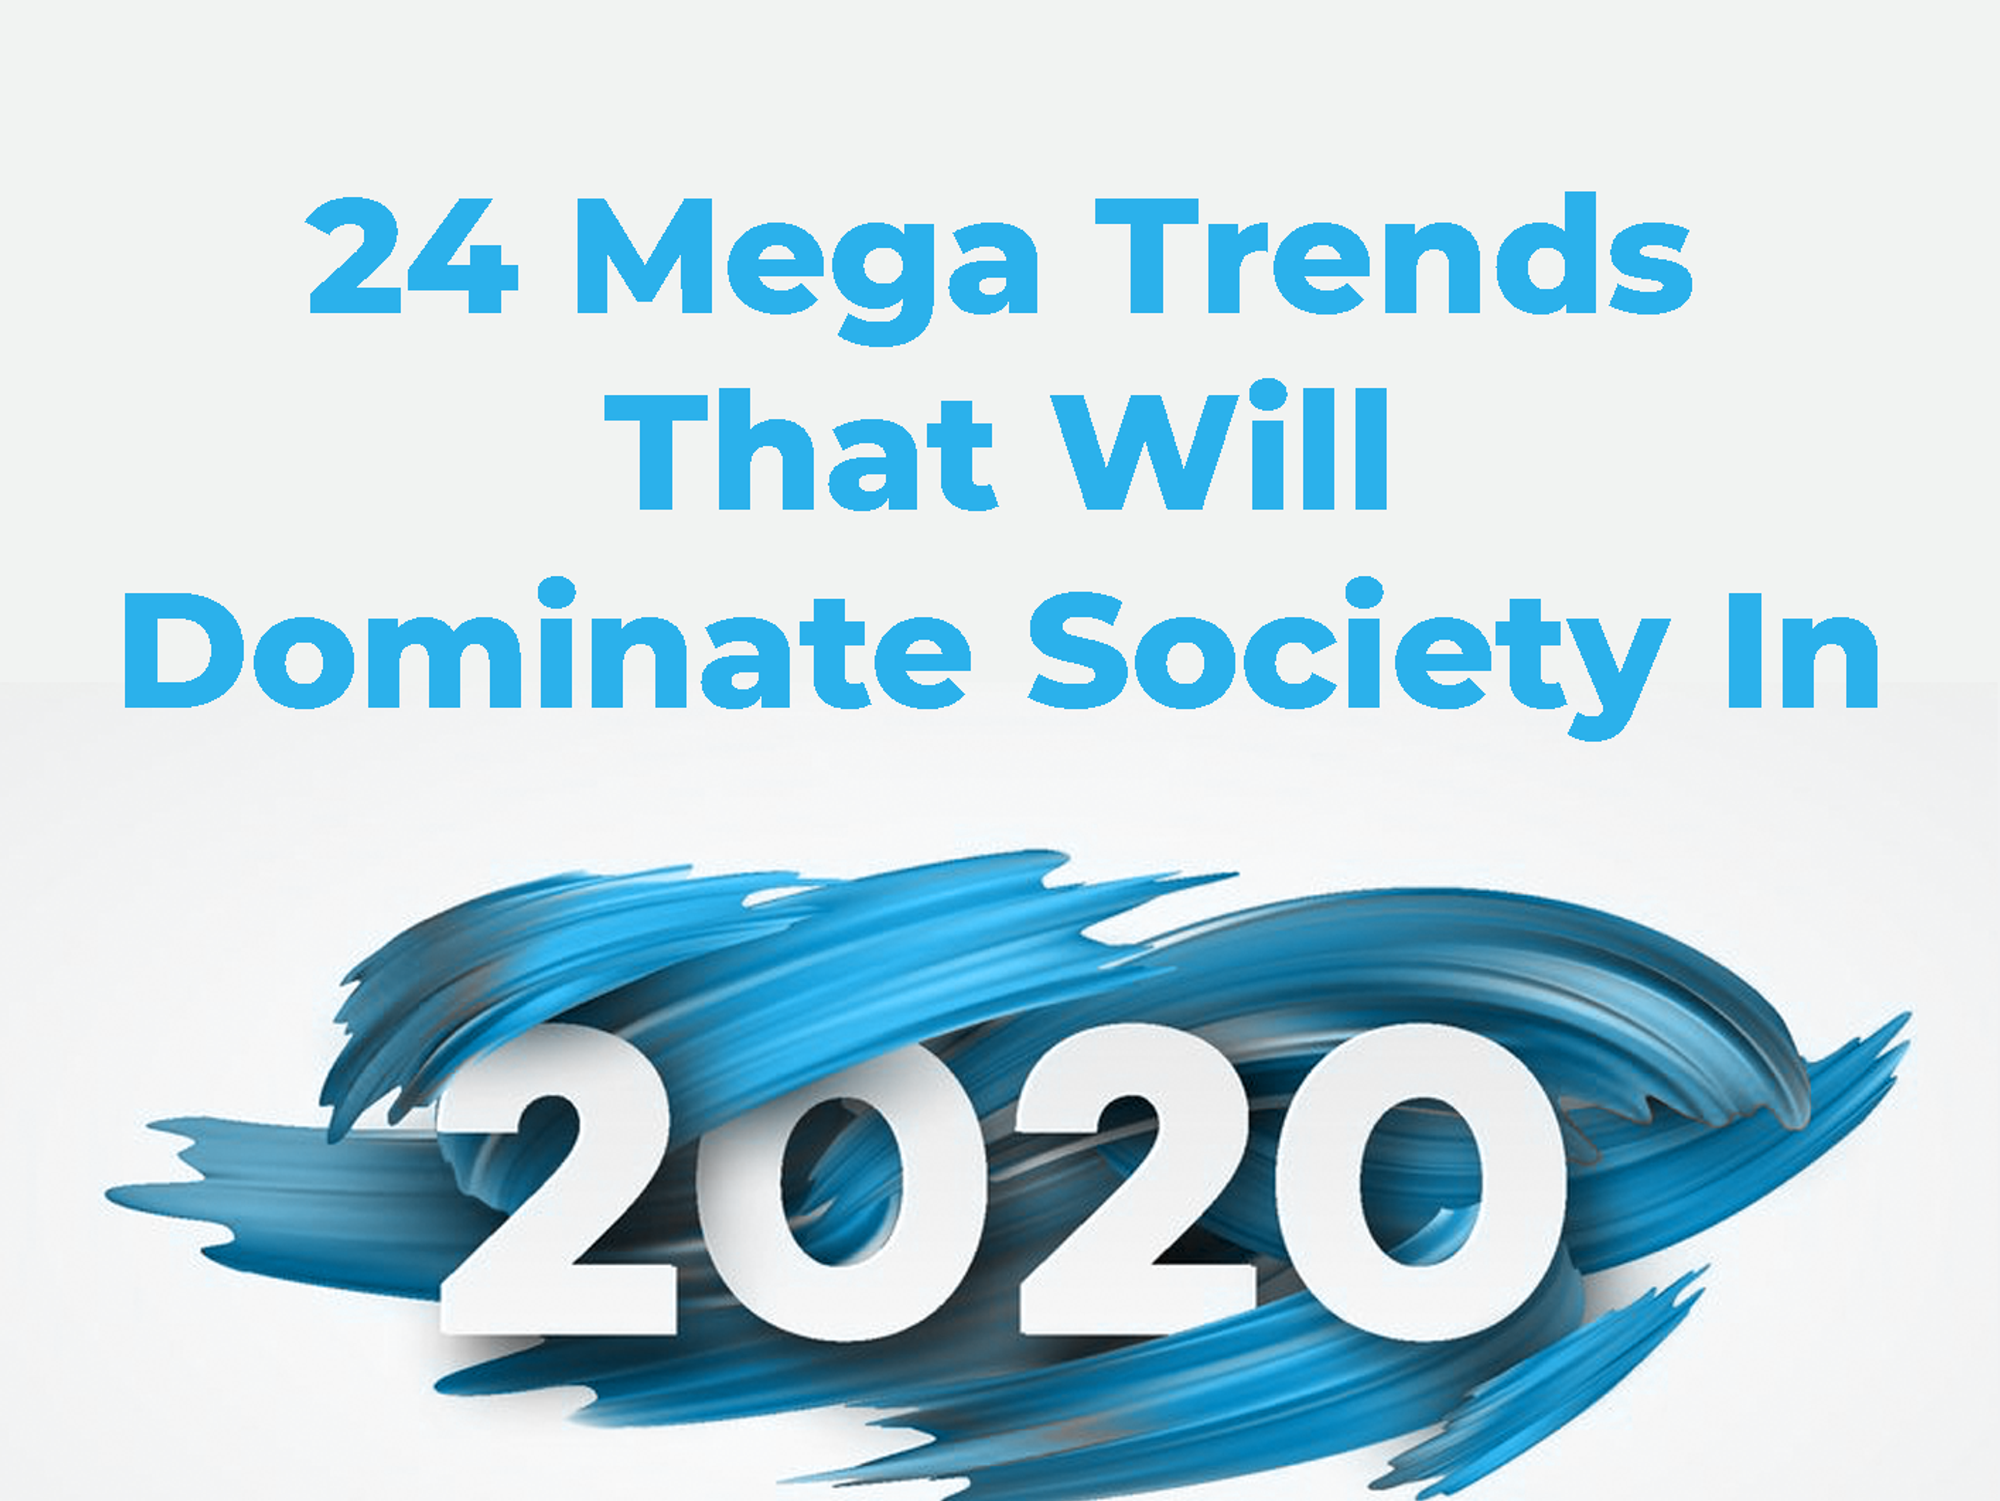 24 Mega Trends That Will Dominate Society In 2020